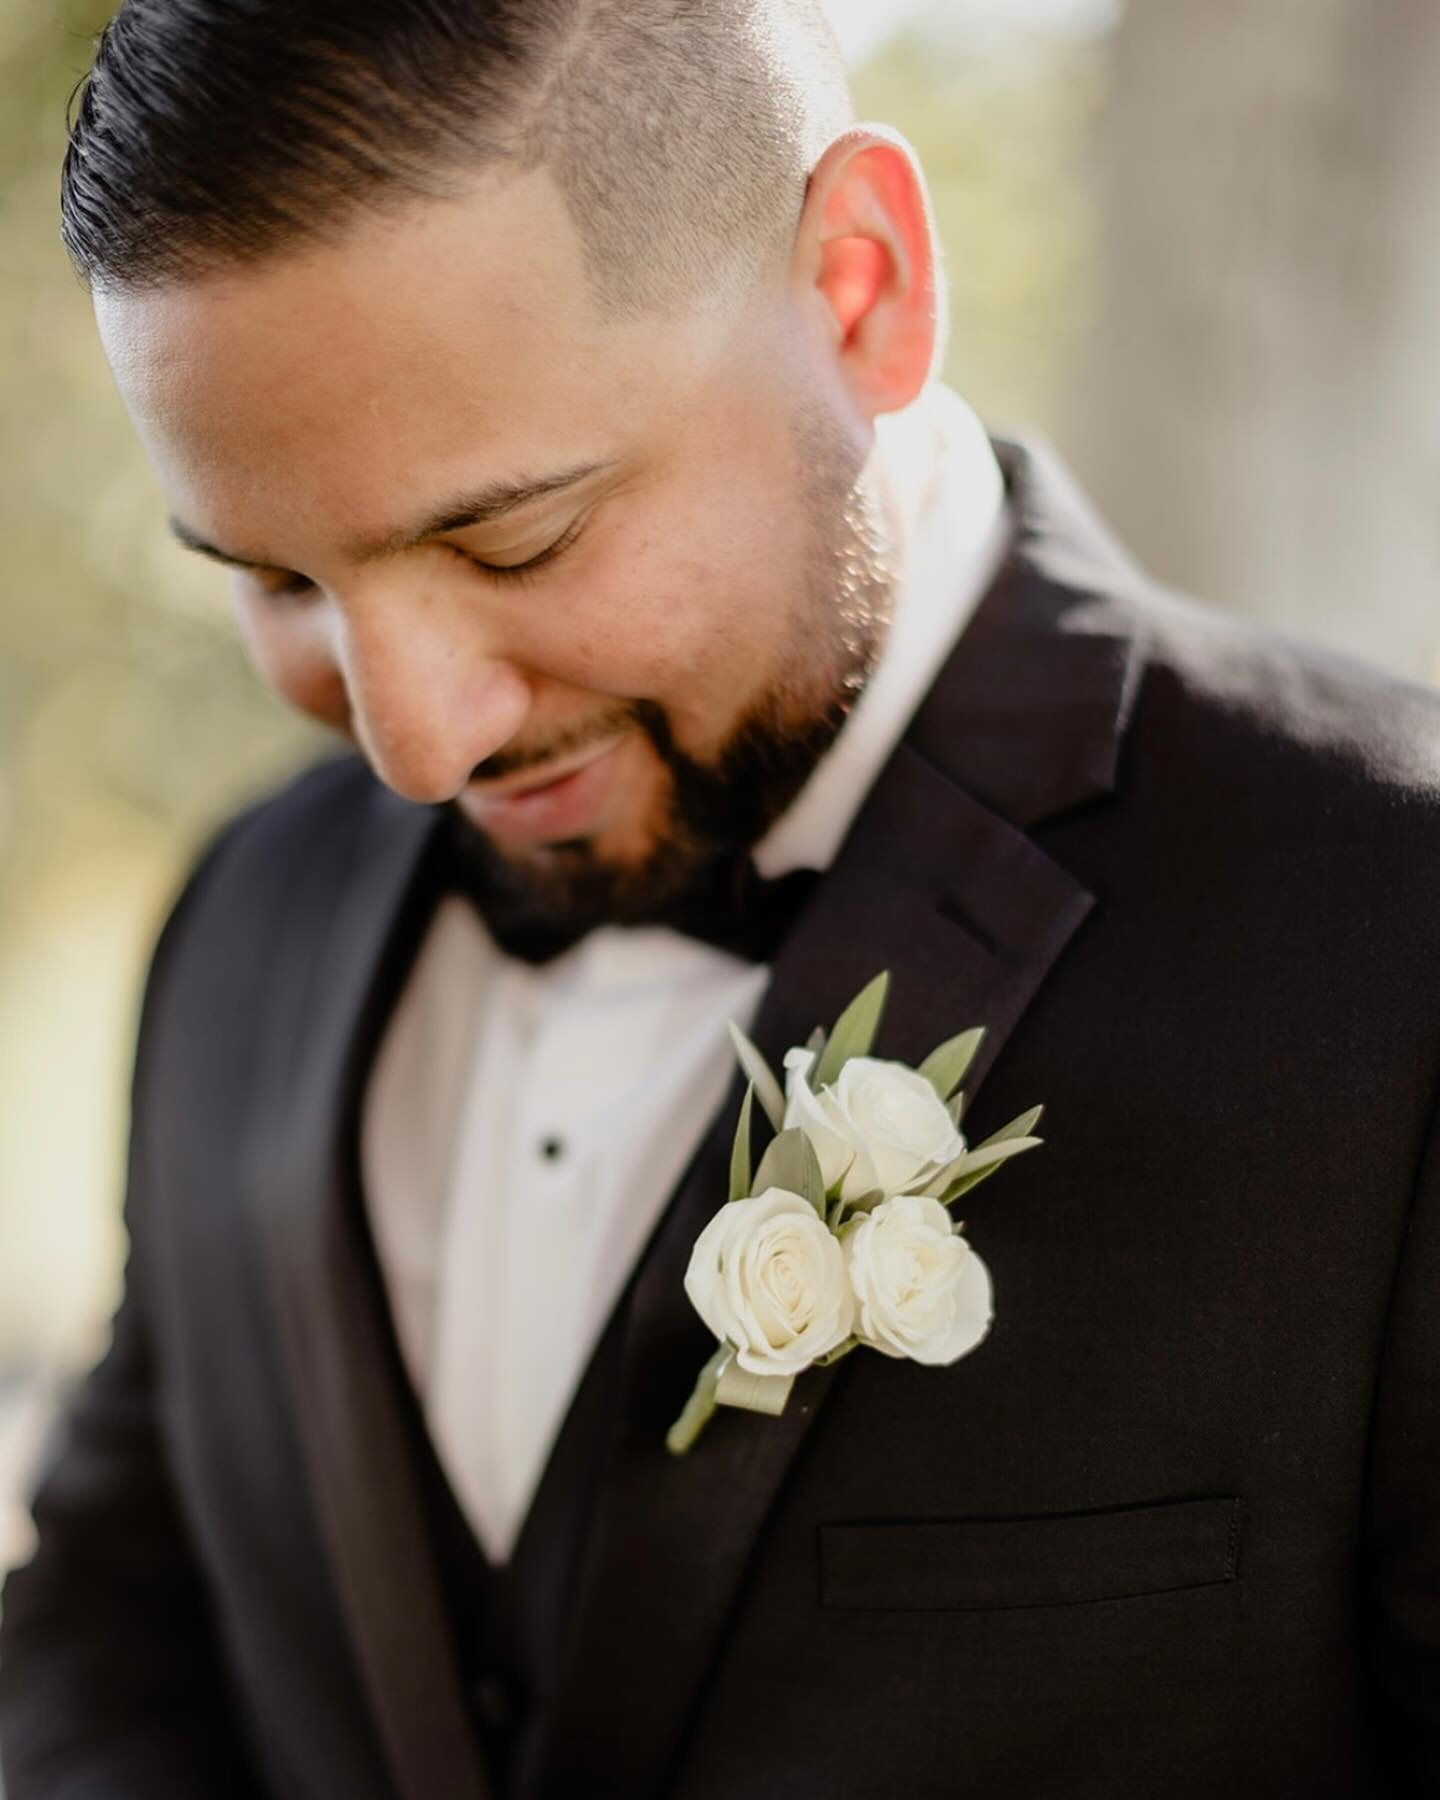 Let&rsquo;s give it up for the all the grooms! Mr. Castillo looking very sharp on his wedding day✨ @glenivy.weddings 
Beautiful pictures by: @hannahmaiselphoto 
Bride: @briiigette__ 
Groom: Jon 
Amazing venue: @glenivy.weddings 

&bull;
&bull;
&bull;